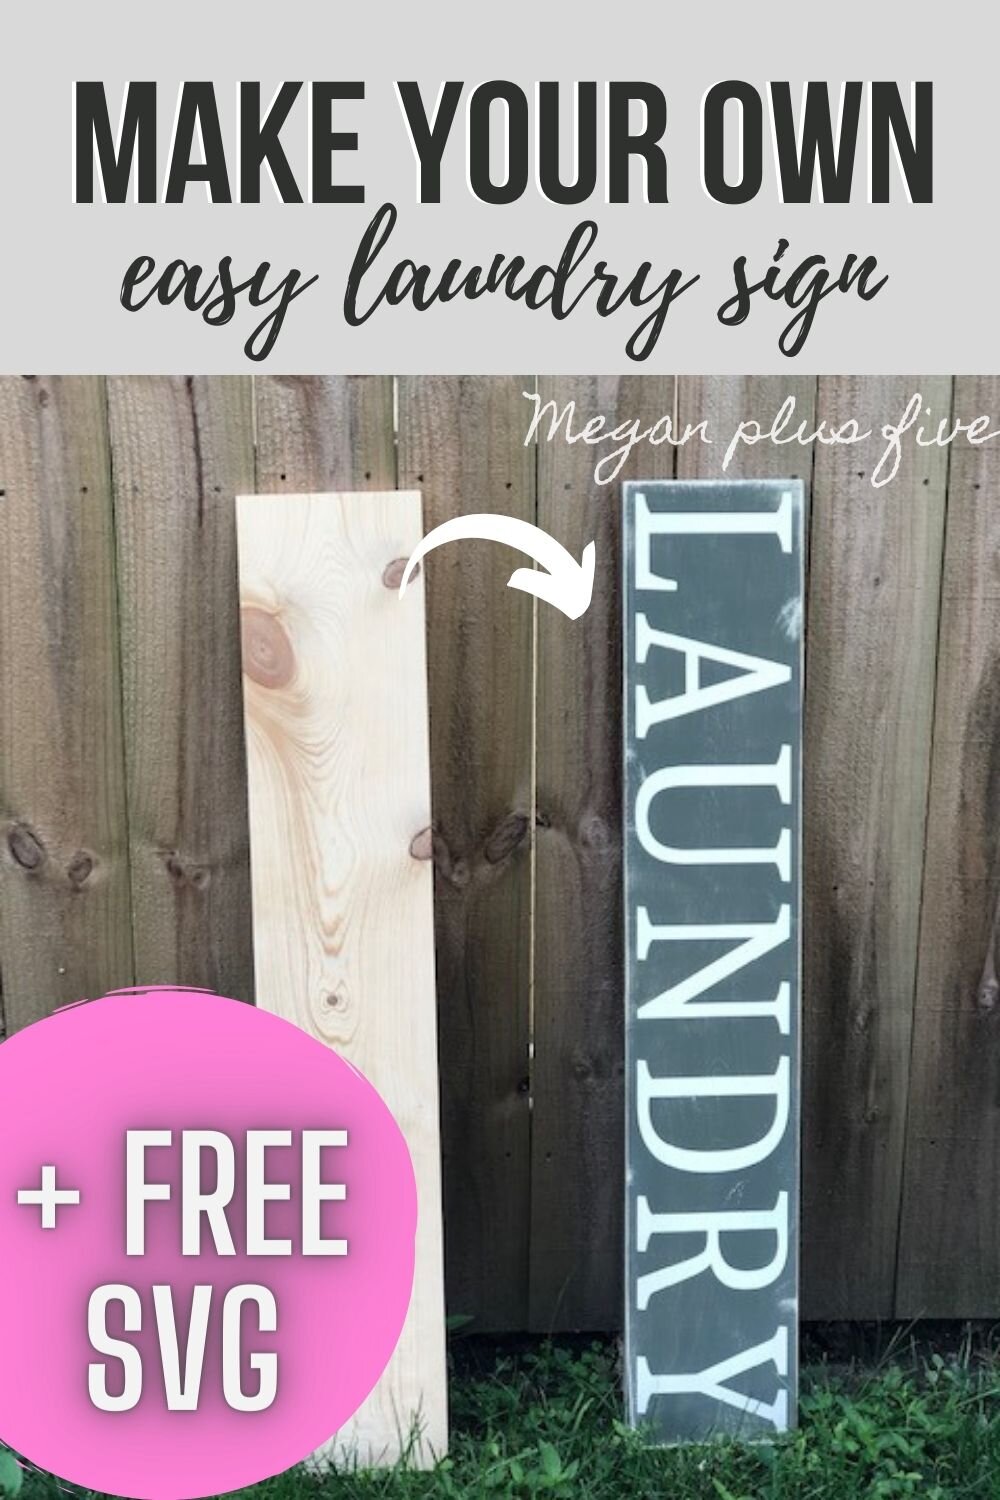 DIY WOOD SIGN TUTORIAL, how to make a wooden stenciled sign for your laundry room. Larger than mat sign tutorial. Oversized sign making step by step tutorial using your Cricut or Silhouette vinyl cutting machine.